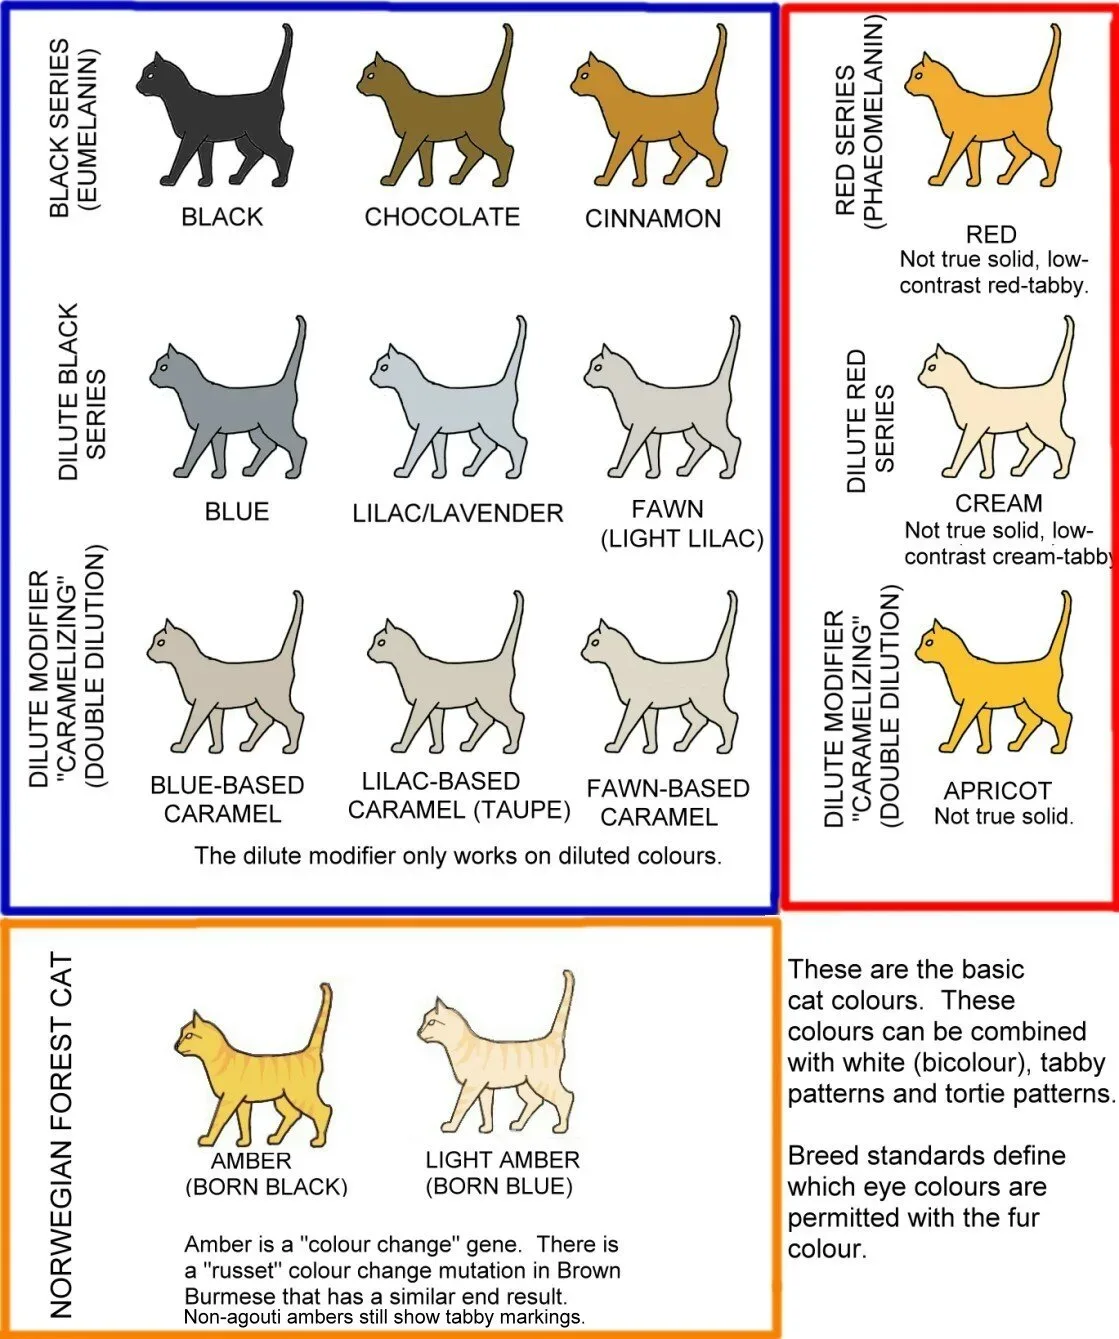 Coat Patterns of Maine Coons